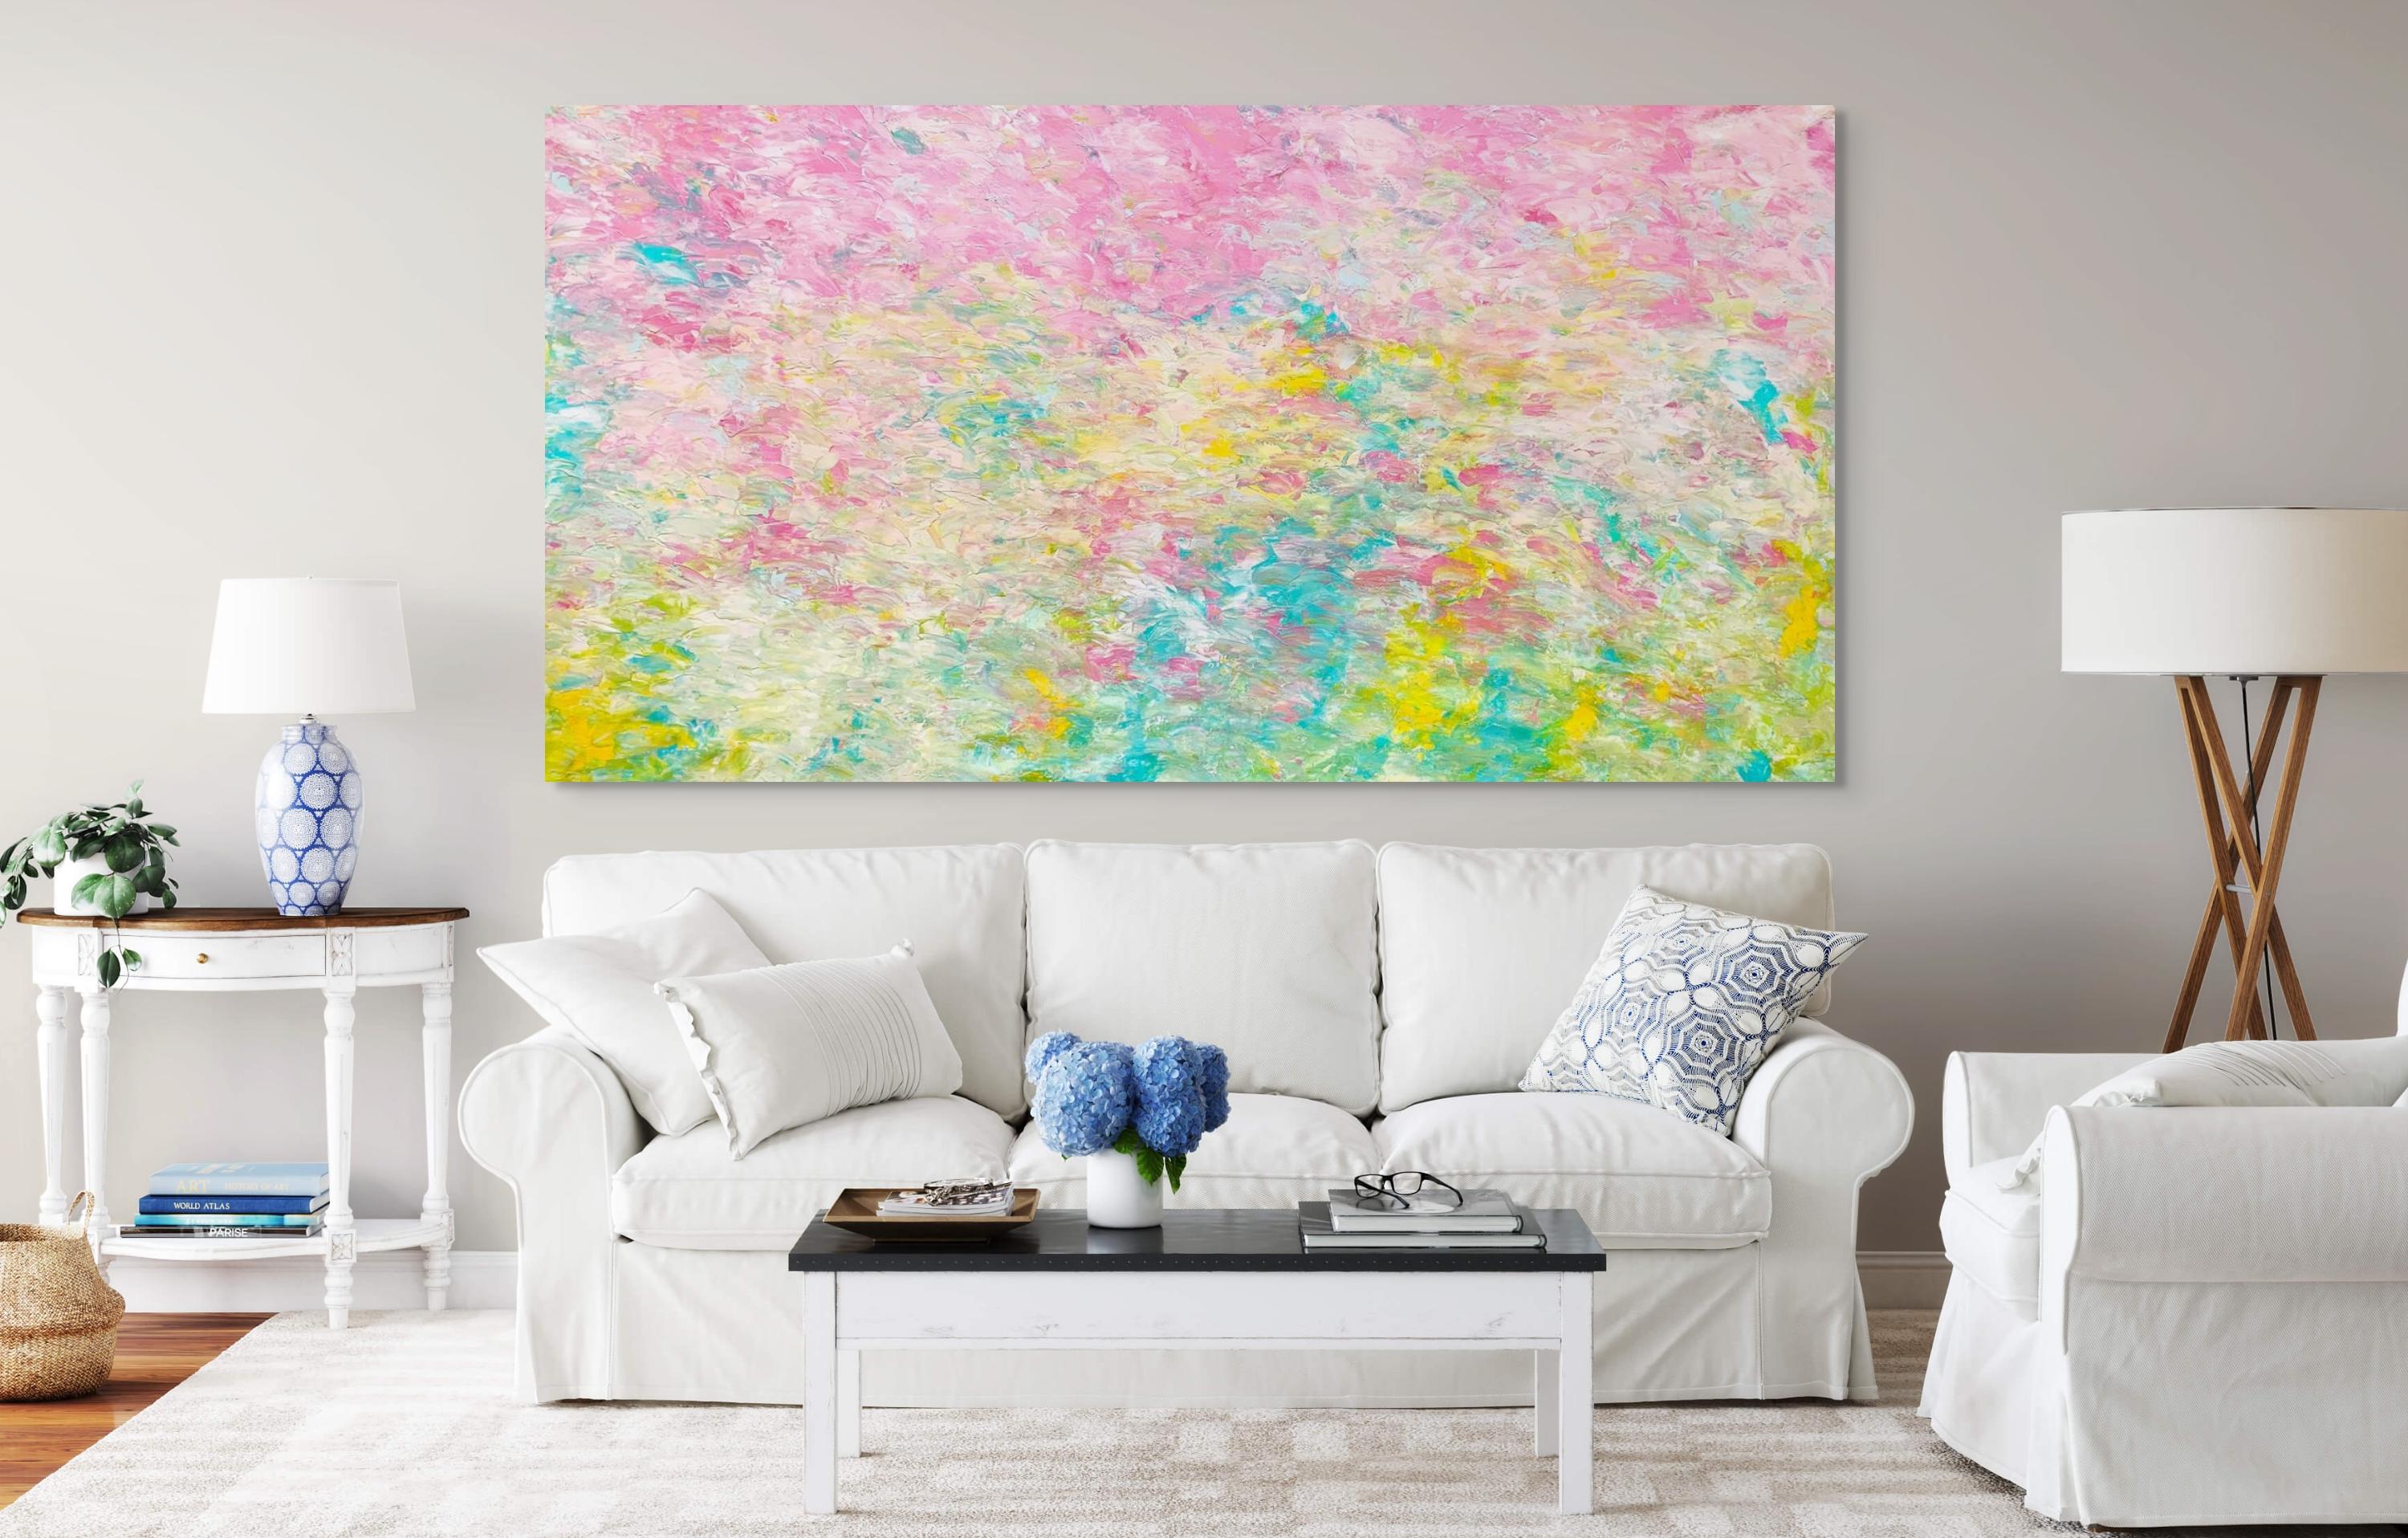 Lollipop Feeling - Abstract Expressionist Painting by Estelle Asmodelle